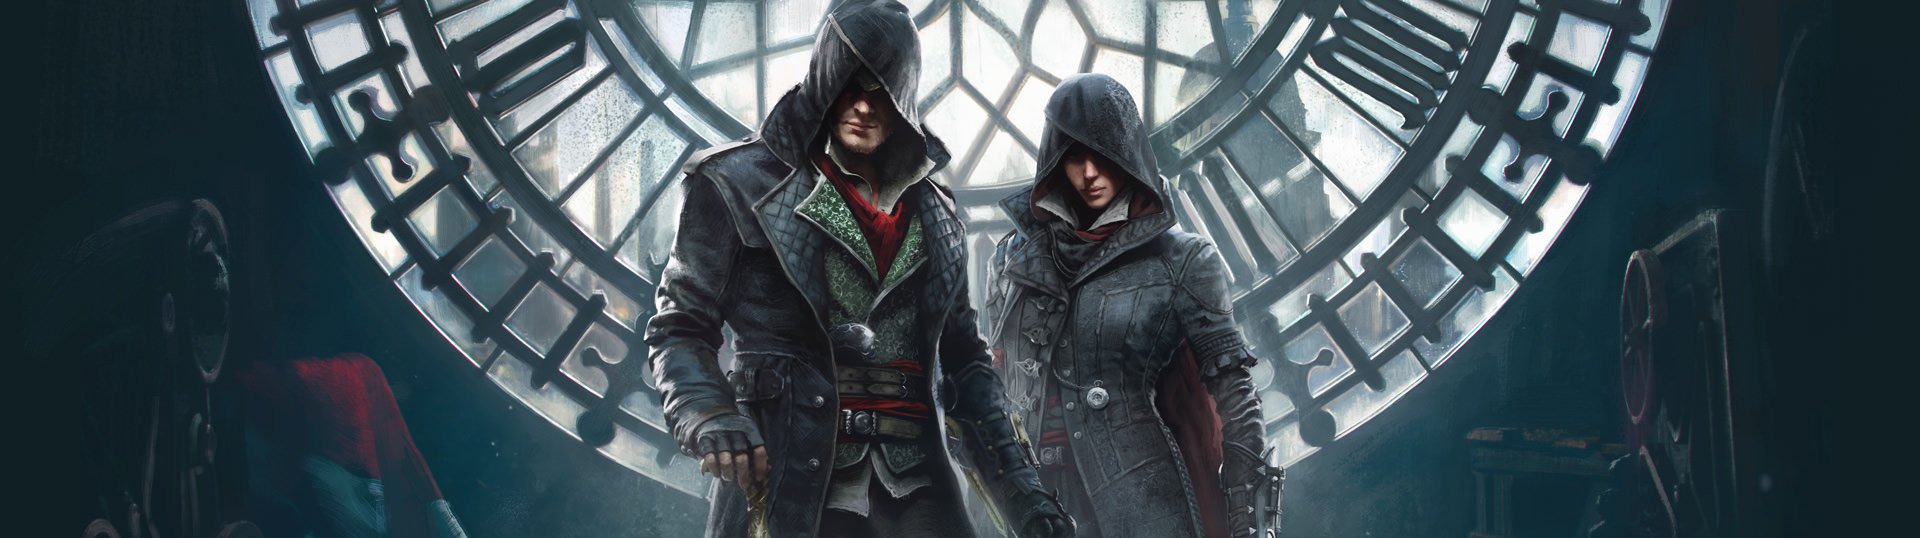 Jogo Assassin’s Creed Syndicate - PC